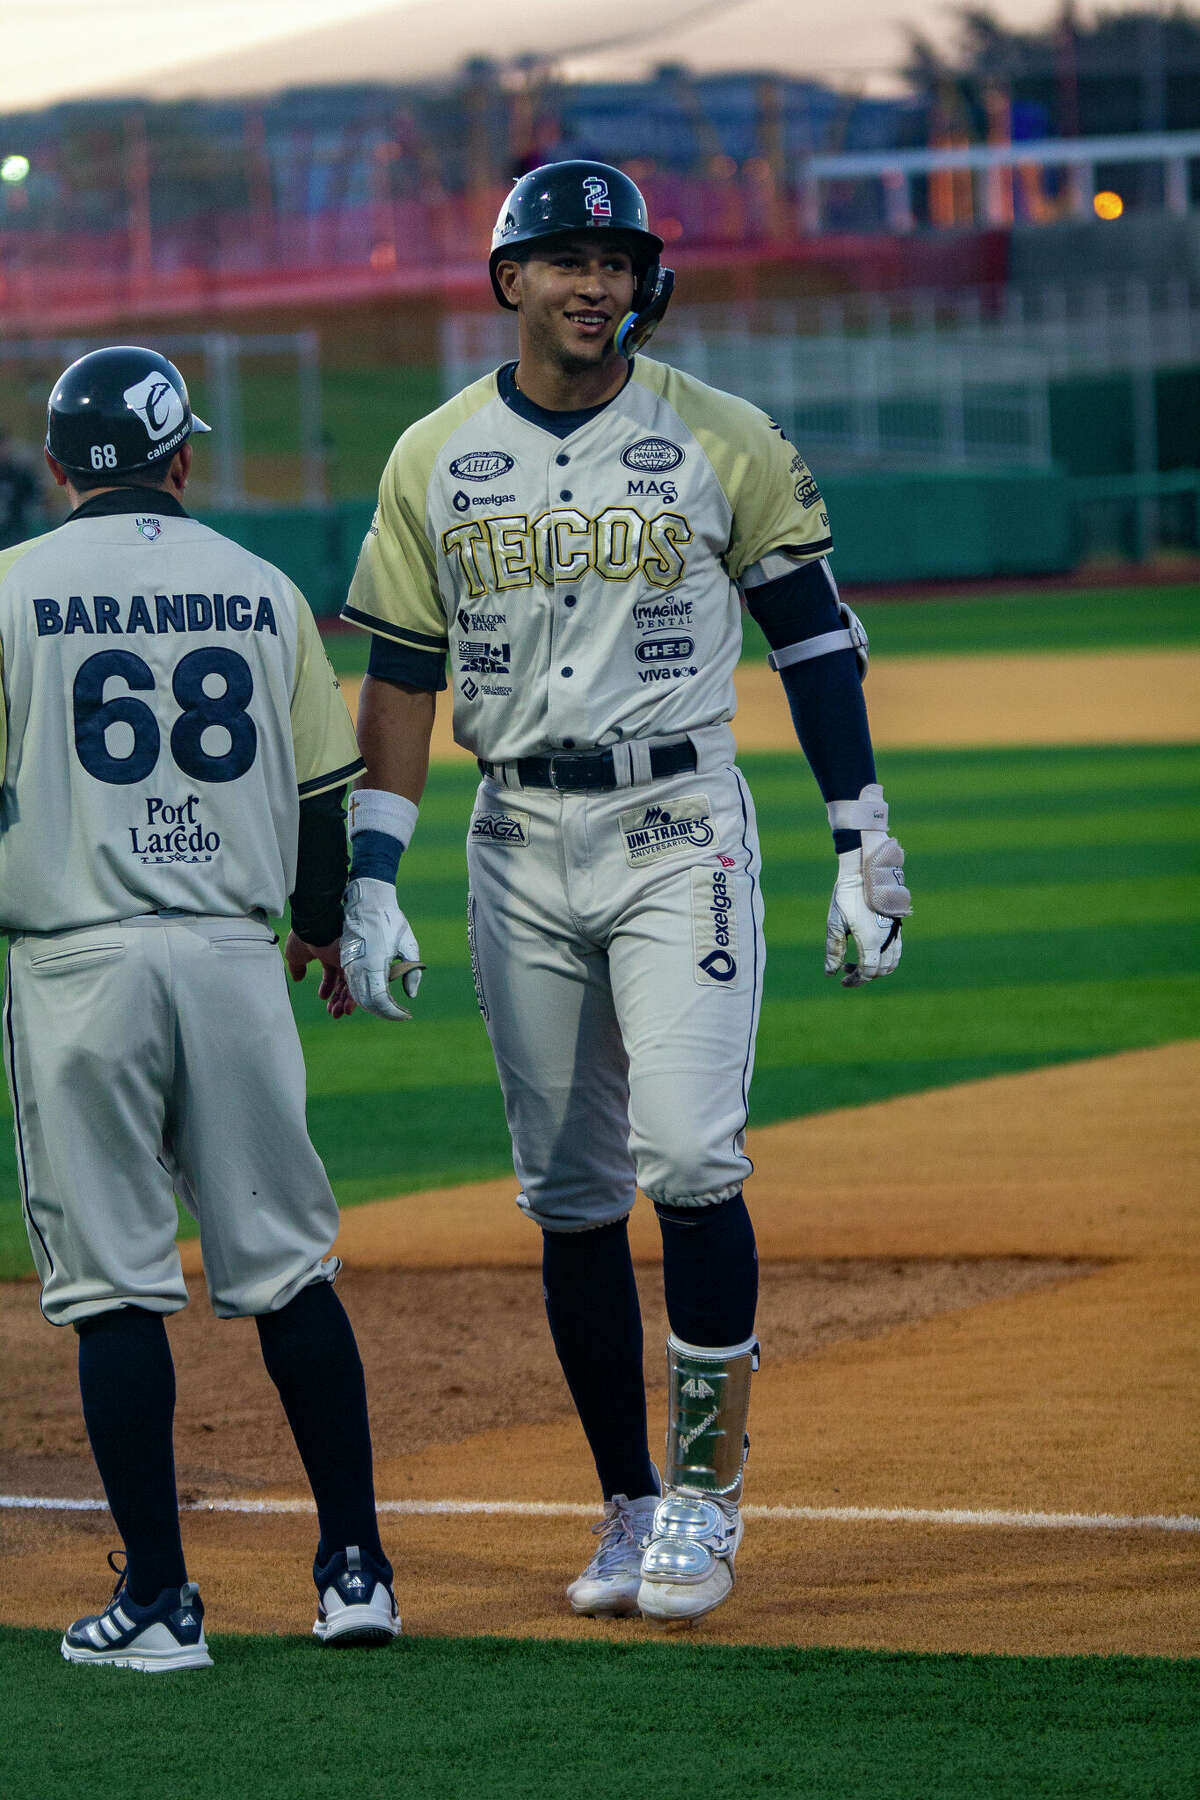 Shortstop Jake Gatewood is looking like a potential All-Star early in his first season with the Tecolotes Dos Laredos.